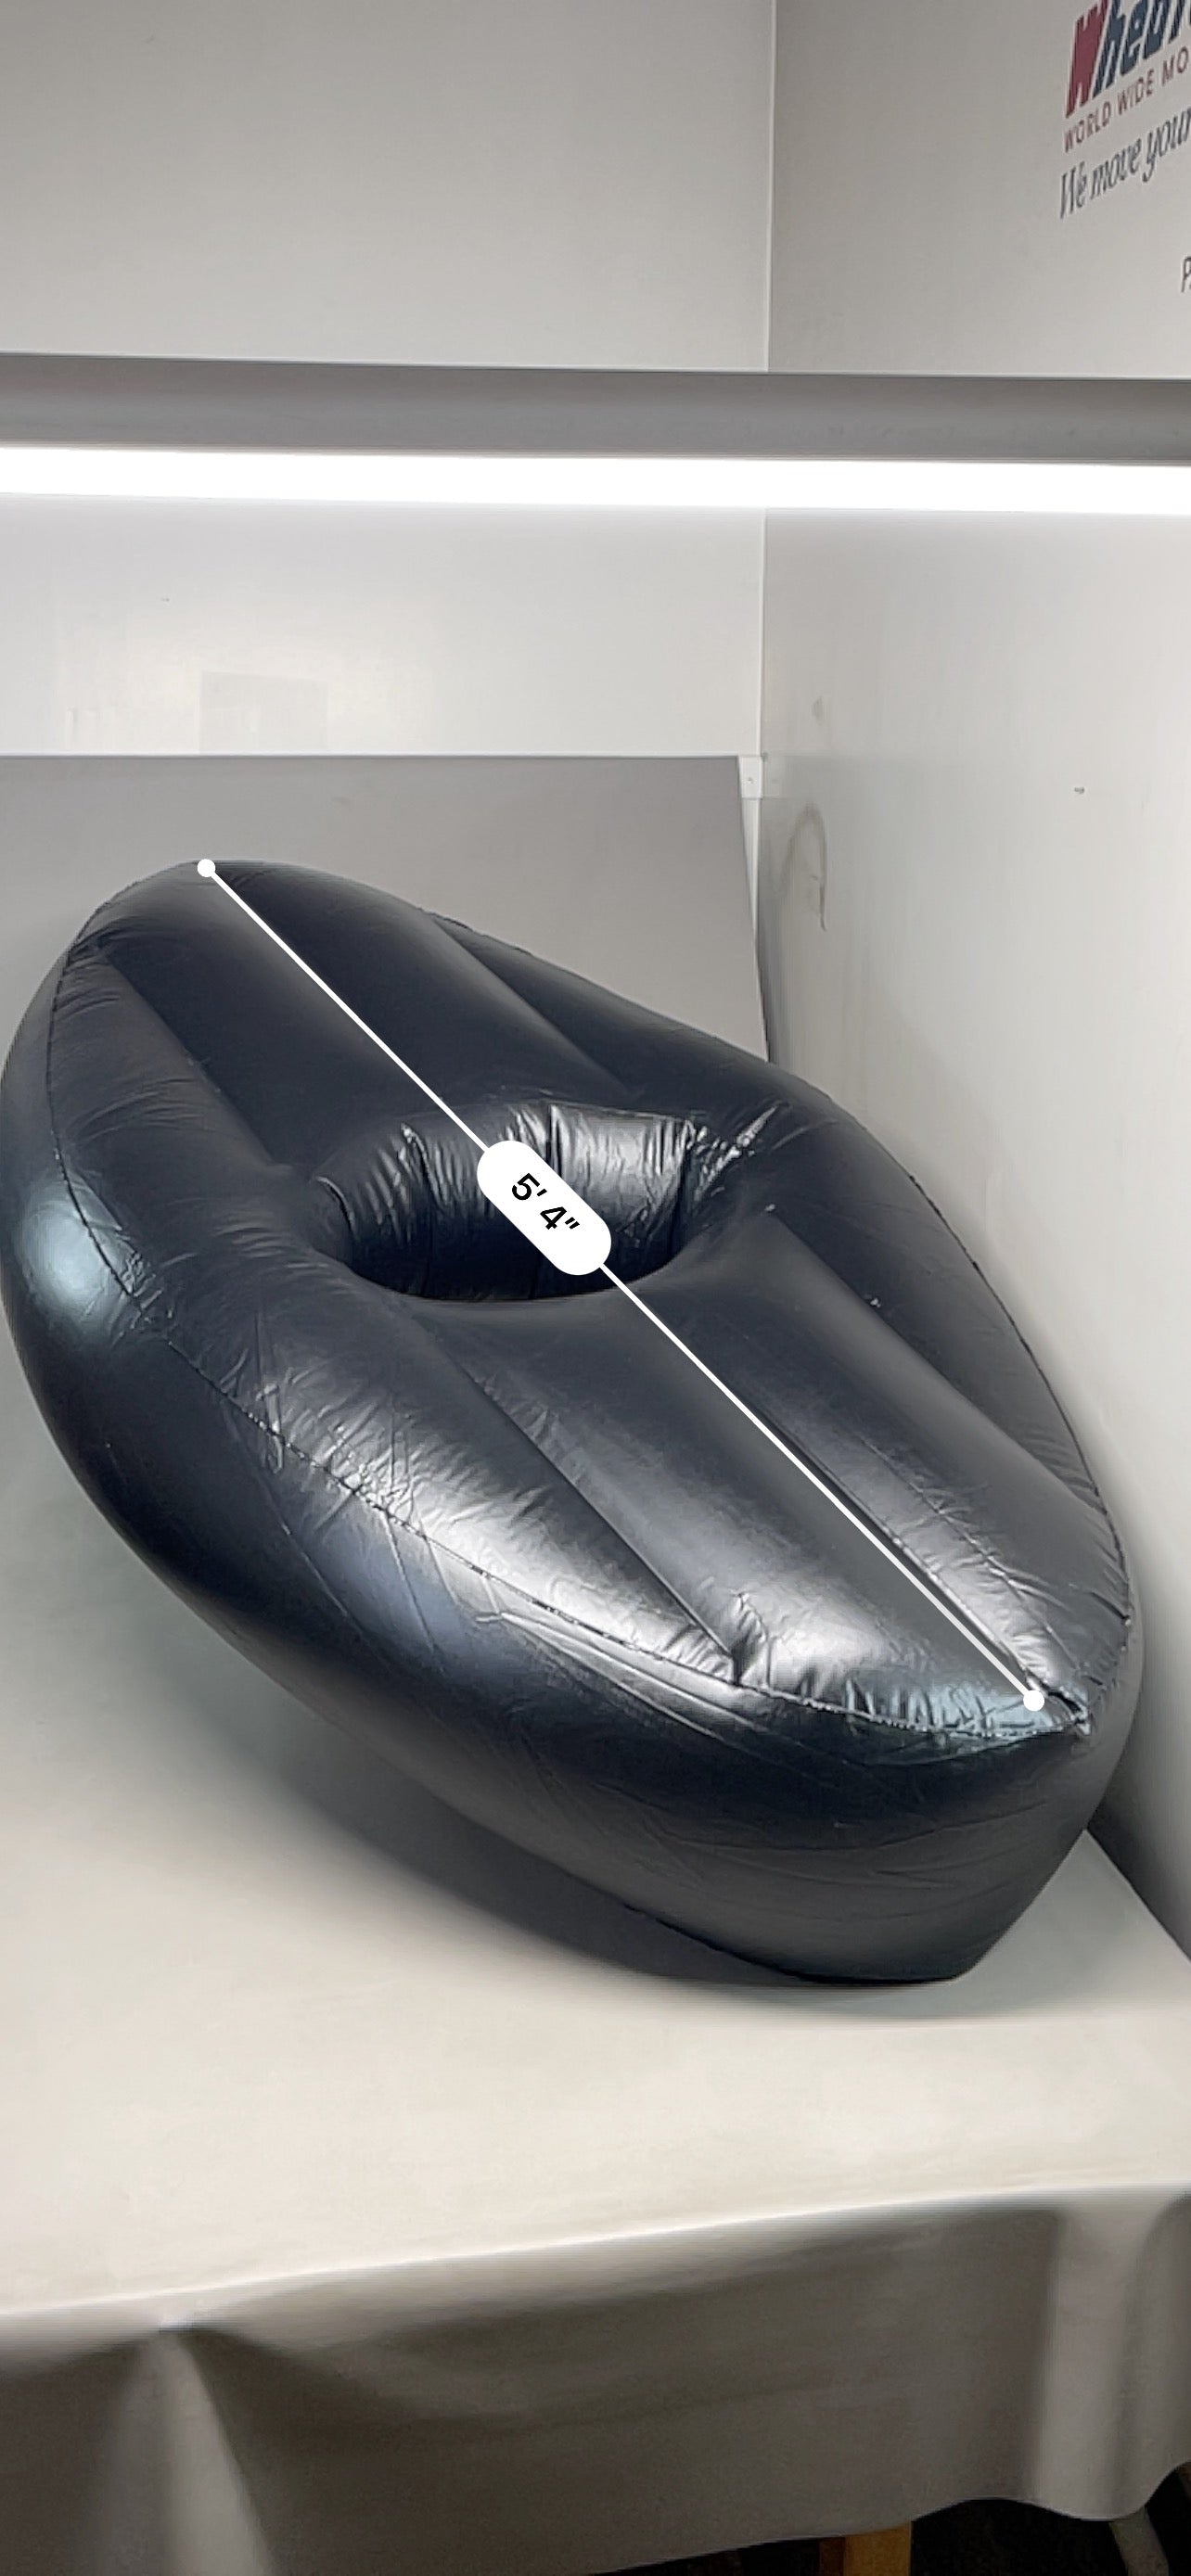 ZA@ BOOTY BEAN BAG BBL Big Inflatable Air Mattress Black 24" Oval With More Support (New)